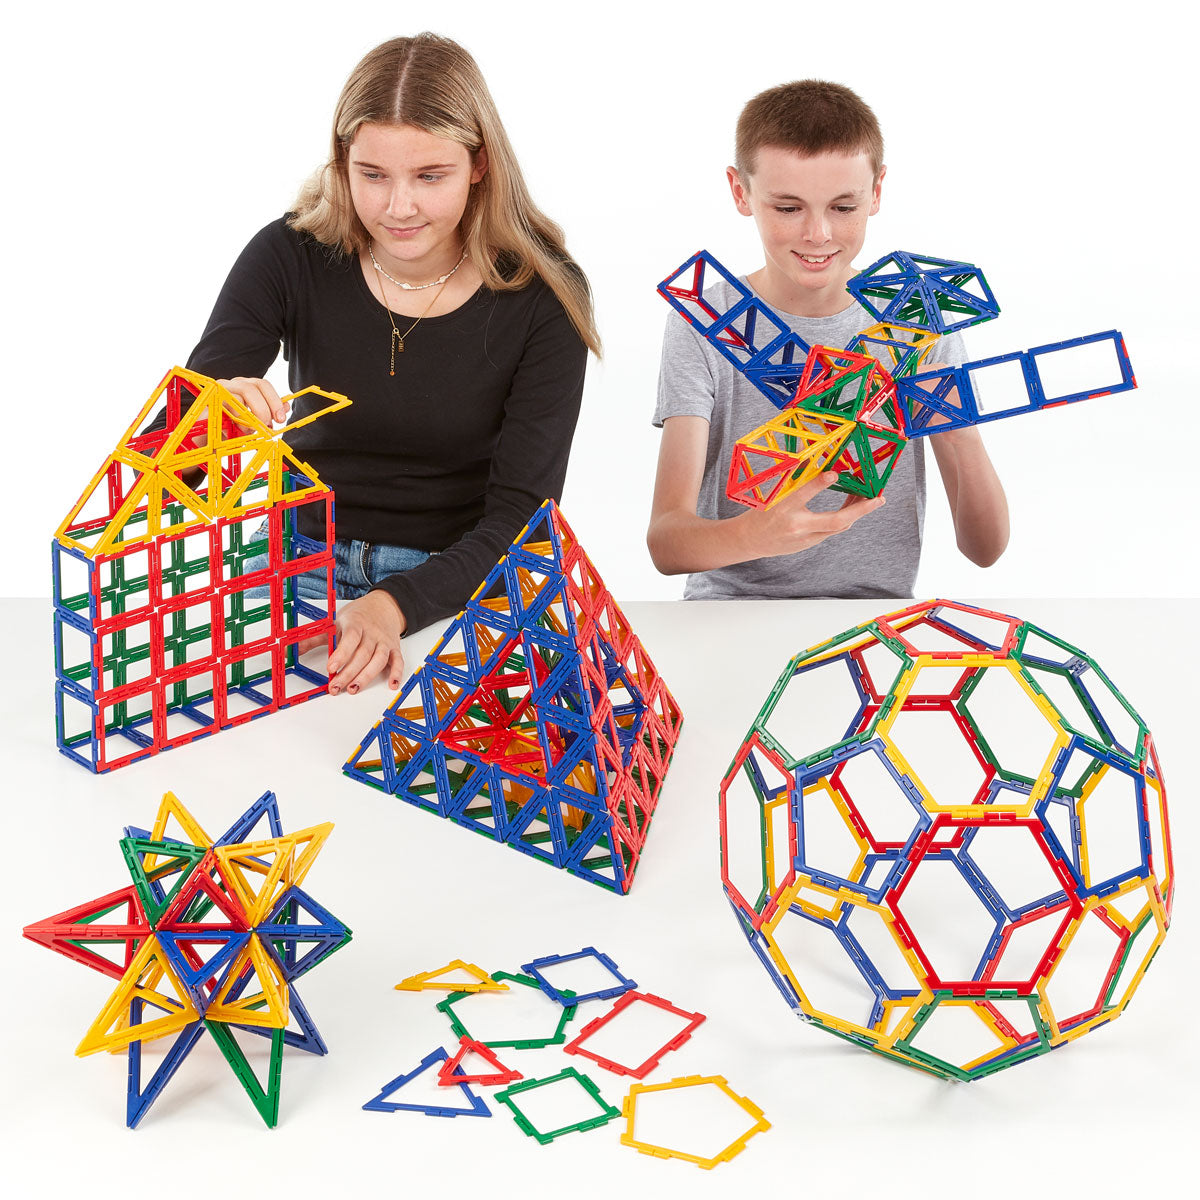 Polydron Frameworks Multi Pack 460 Pieces, Unleash your creativity and explore the world of structures and geometric solids with the Polydron Frameworks Multi Pack 460 Pieces. This massive set offers endless possibilities for construction and discovery, making it a must-have for any learning environment.The set contains a whopping 460 pieces in total, providing a wide range of shapes to work with. Included in the set are 20 hexagons, 80 squares, 160 equilateral triangles, 40 pentagons, 80 right angle triang